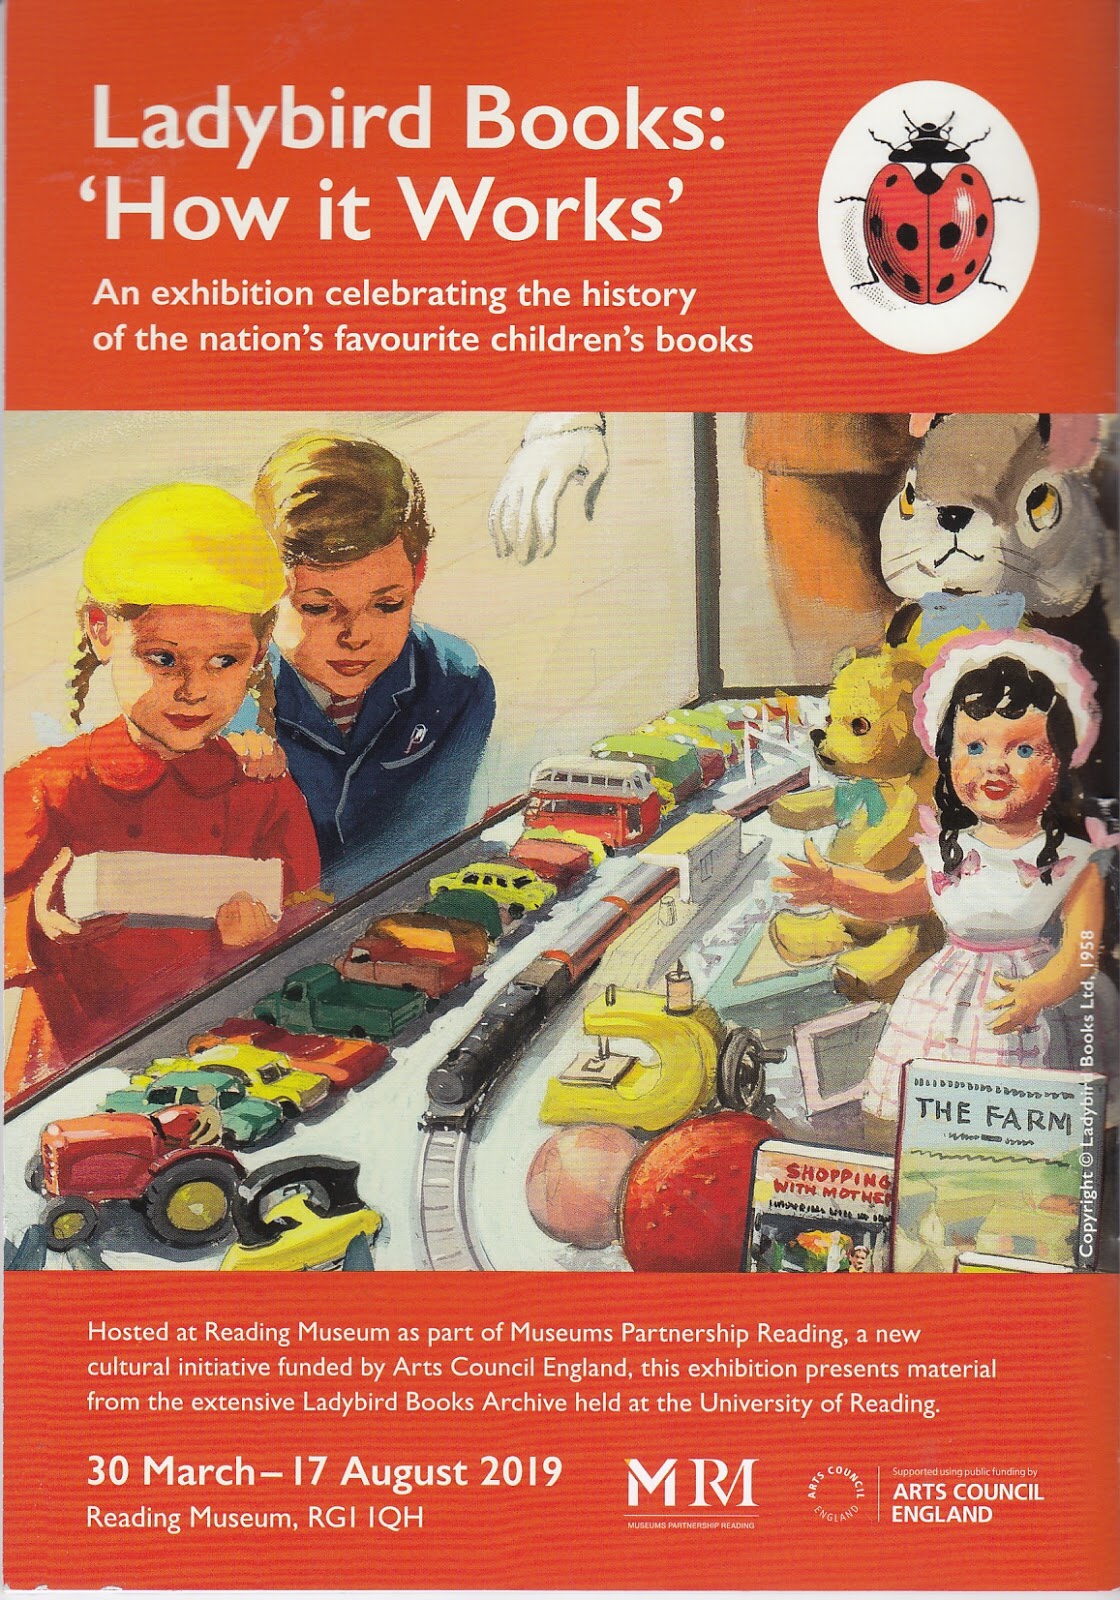 The Reading Museum poster features art titled “Outside the Toy Shop” illustrated by Harry Wingfield, from Shopping with Mother, Margaret Elise Gagg, 1958 © Ladybird Books Ltd, 1958